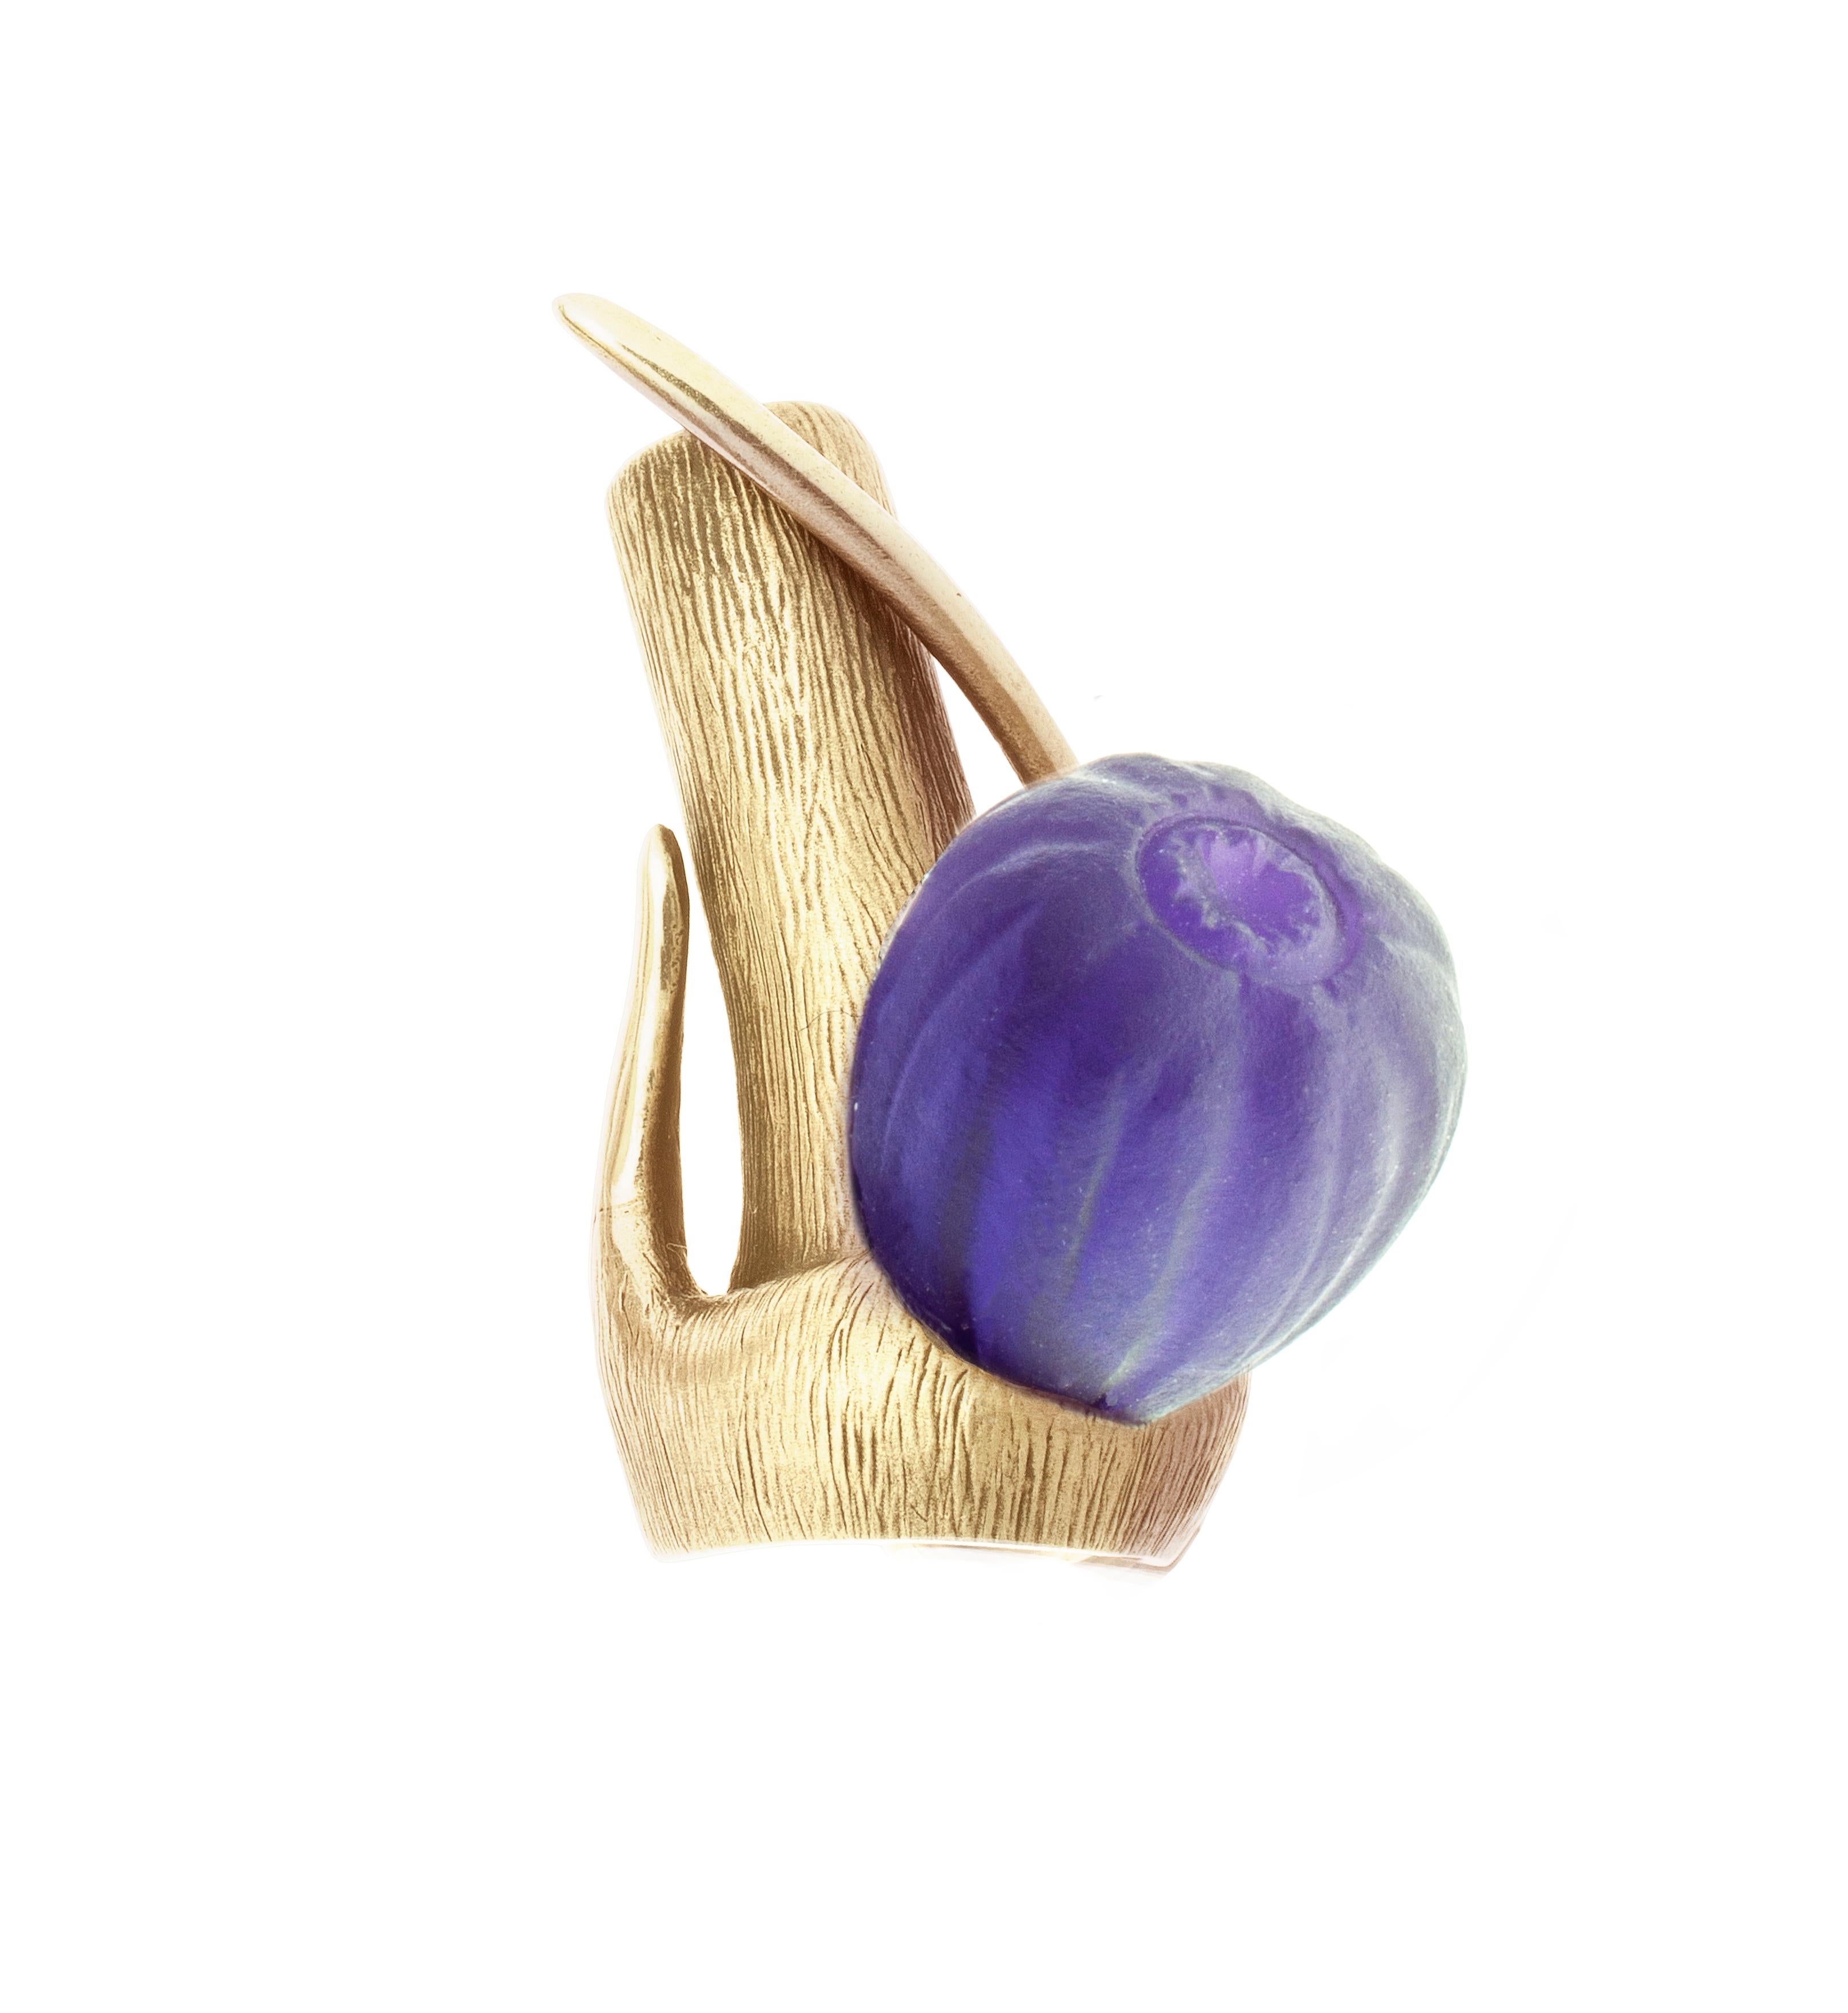 This Art Nouveau Style Fig Brooch is made of 14 karat yellow gold with amethyst. The collection was featured in a Harper's Bazaar UA editorial. This piece can be personally signed.

The fig fruit is a unique, hand-crafted sculpture of the sweetest